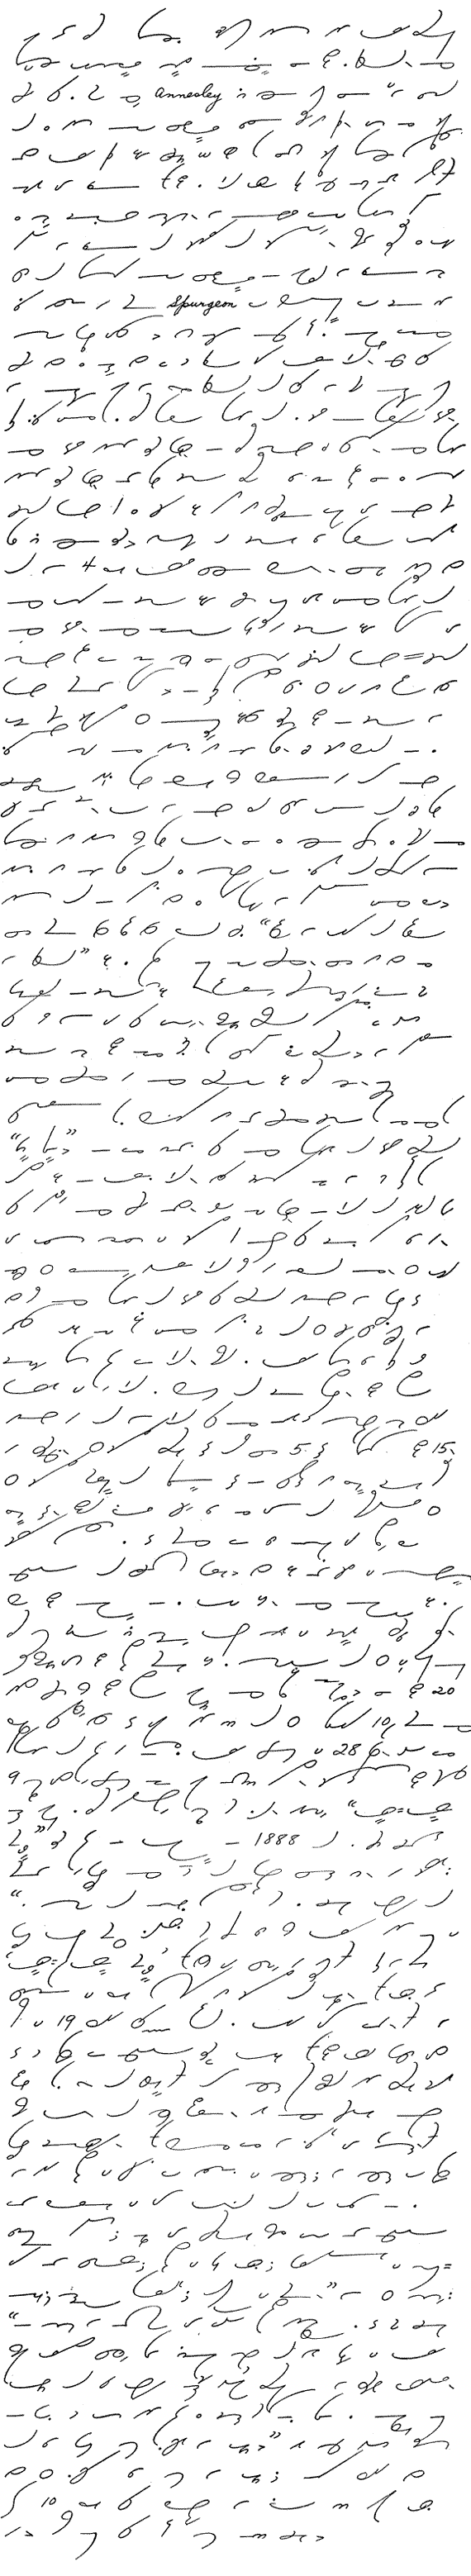 This is the Gregg Shorthand version of the story of Gregg.